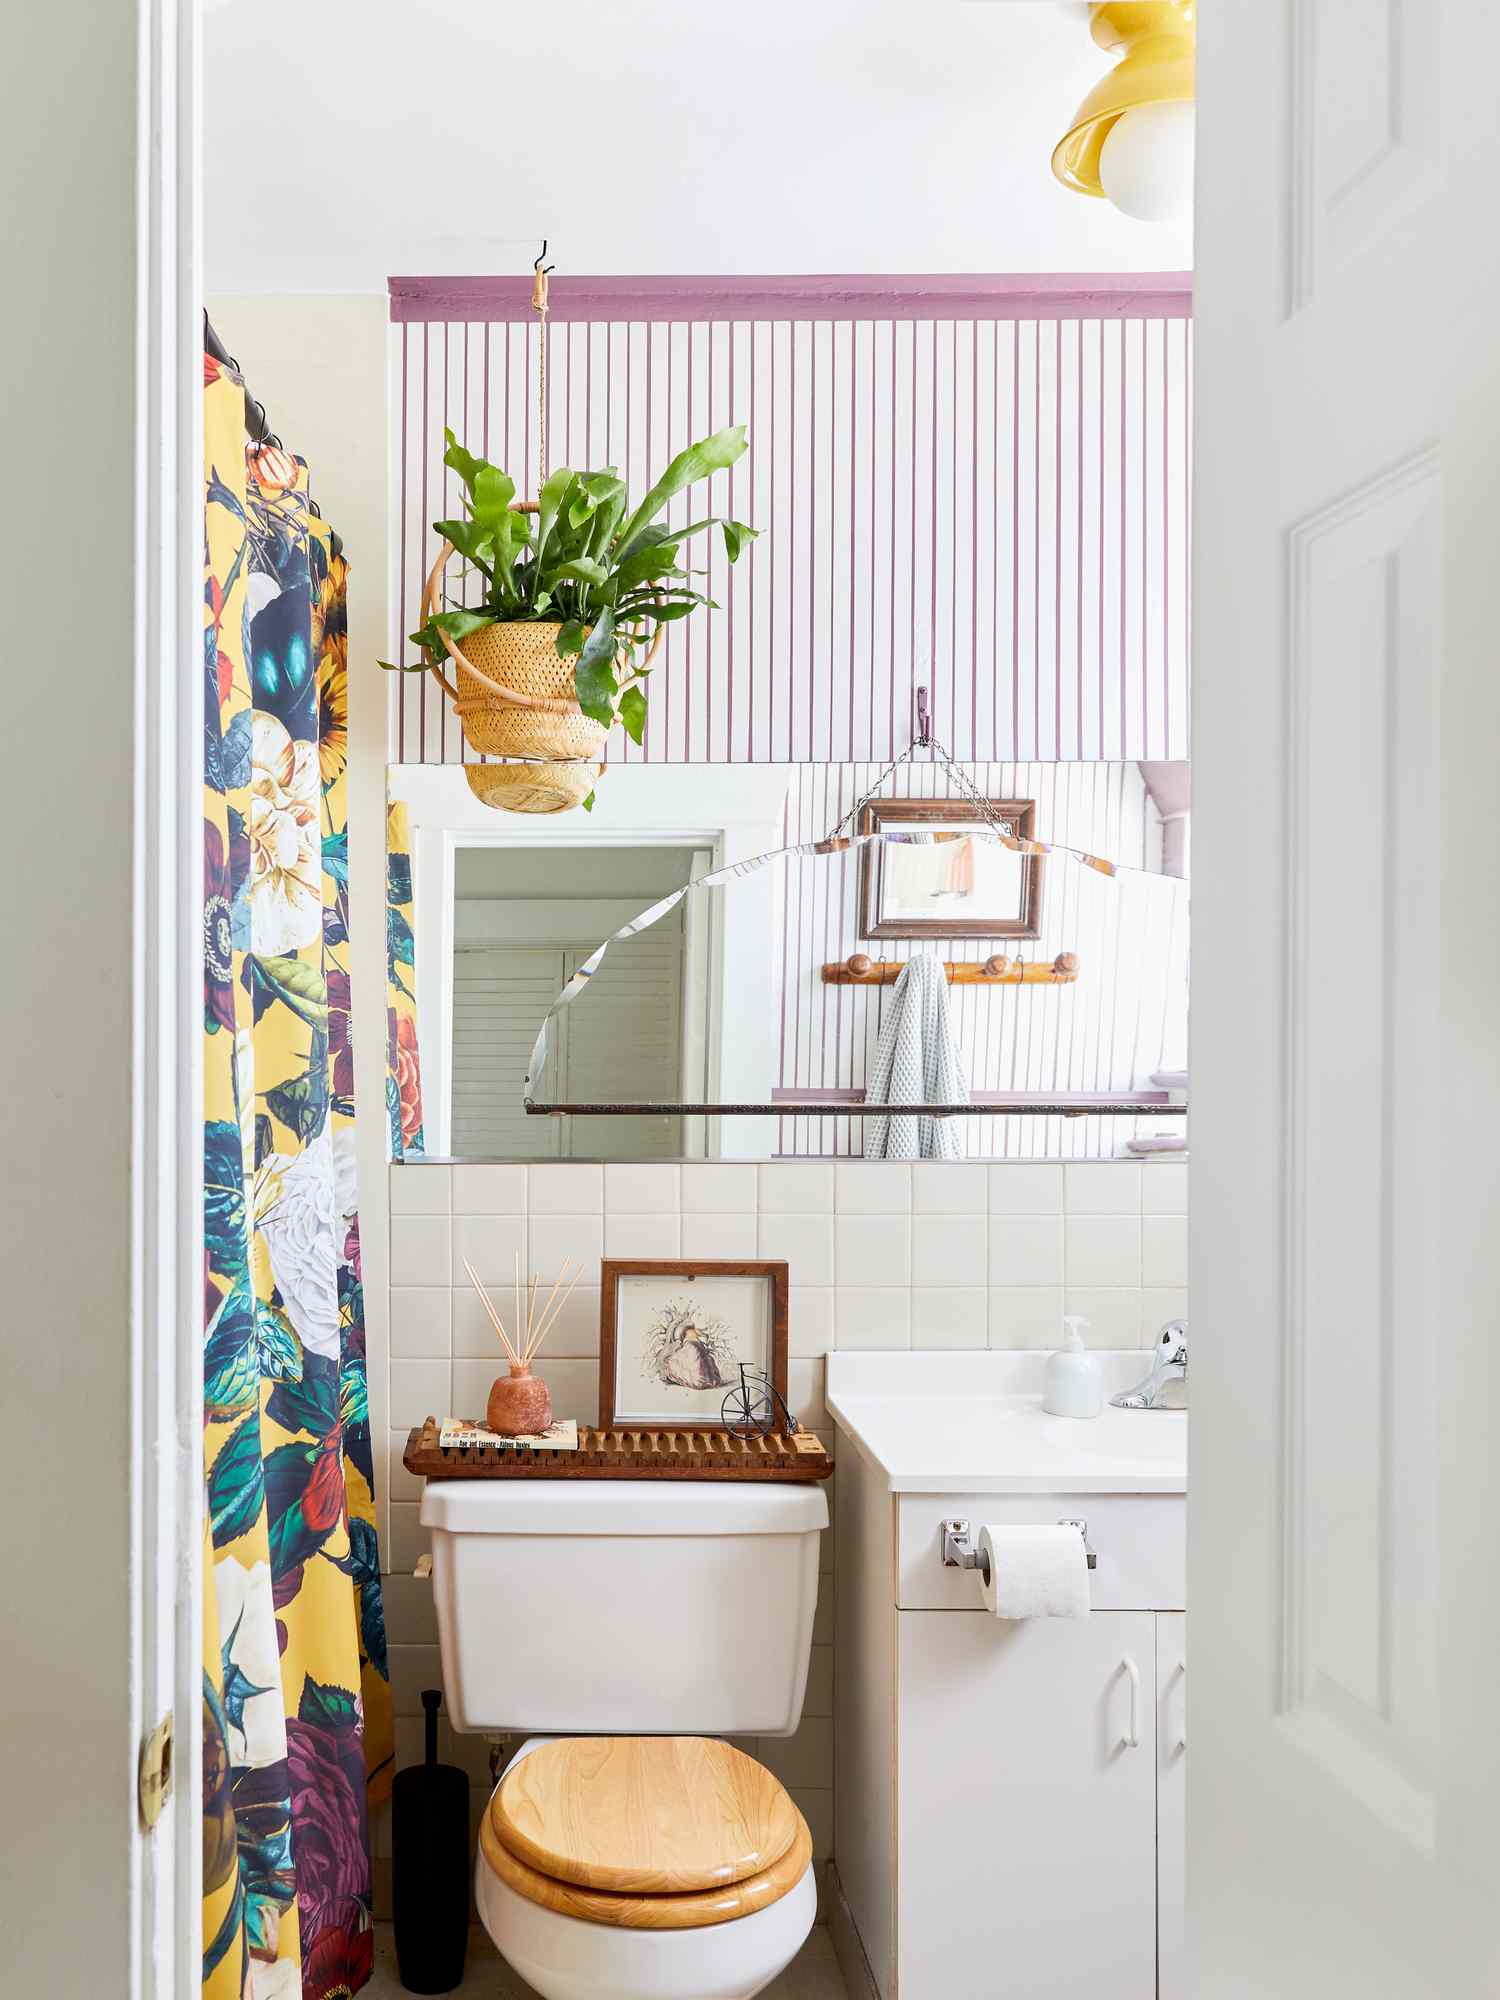 Purple accented bathroom with toilet paper holder on the vanity unit